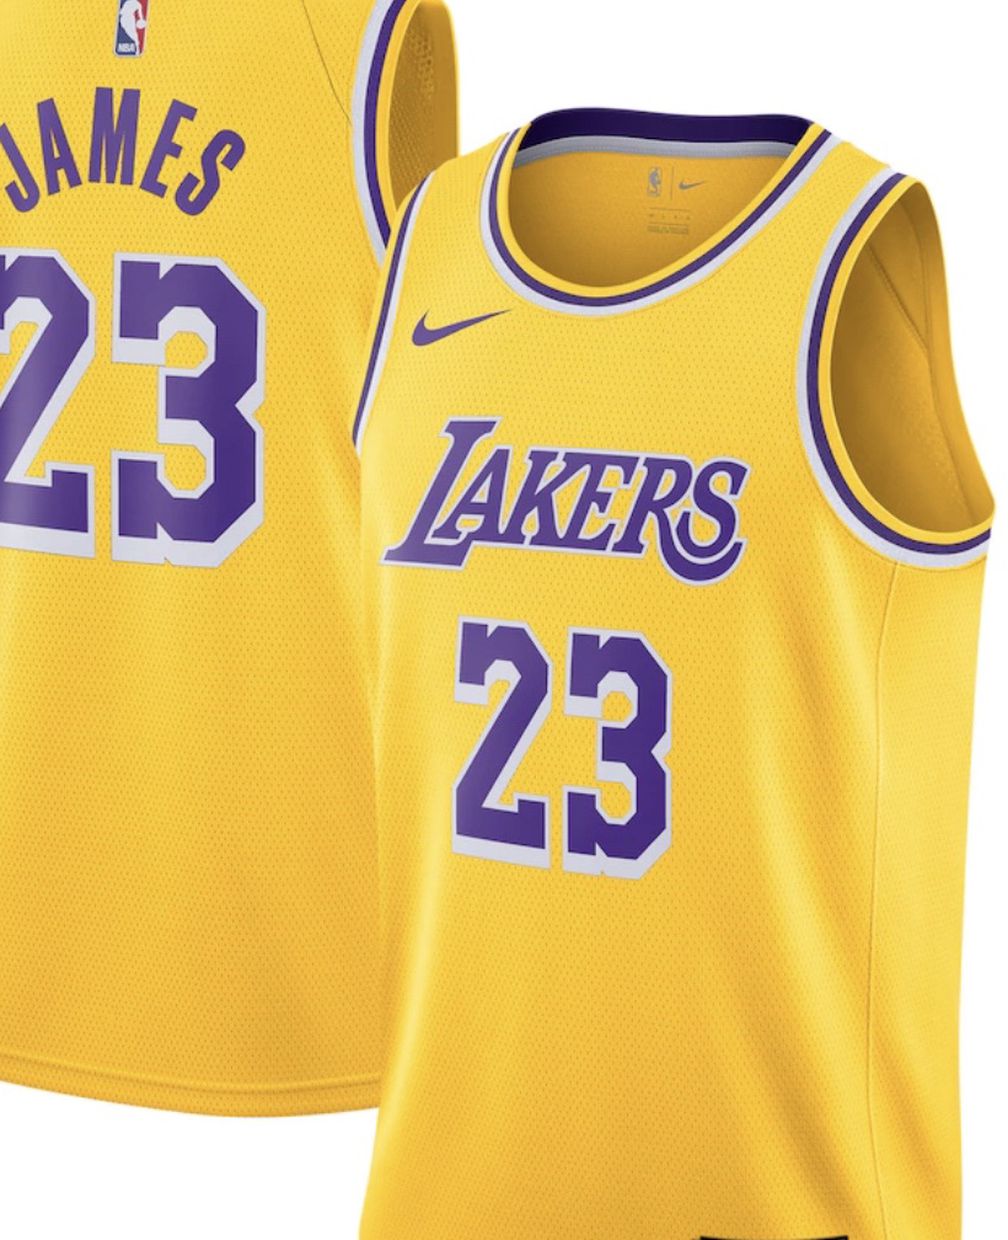 Lebron James Youth Jersey